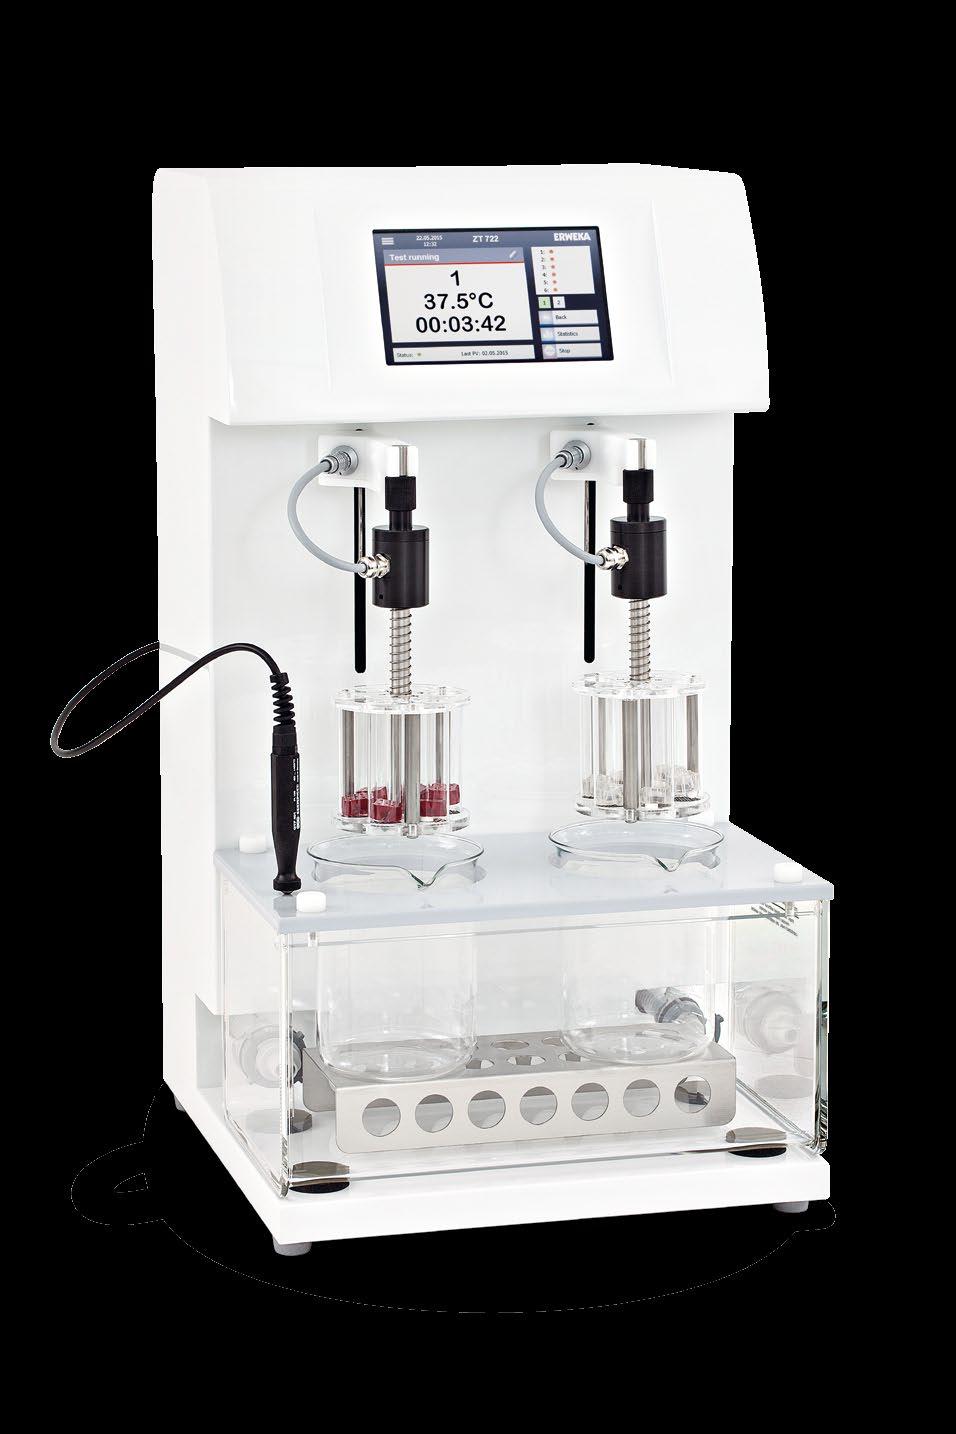 Automated disintegration tester with touch ZT 720 series The ERWEKA ZT 720 series automatically determines the disintegration time of samples by using a unique system of magnets and sensors.